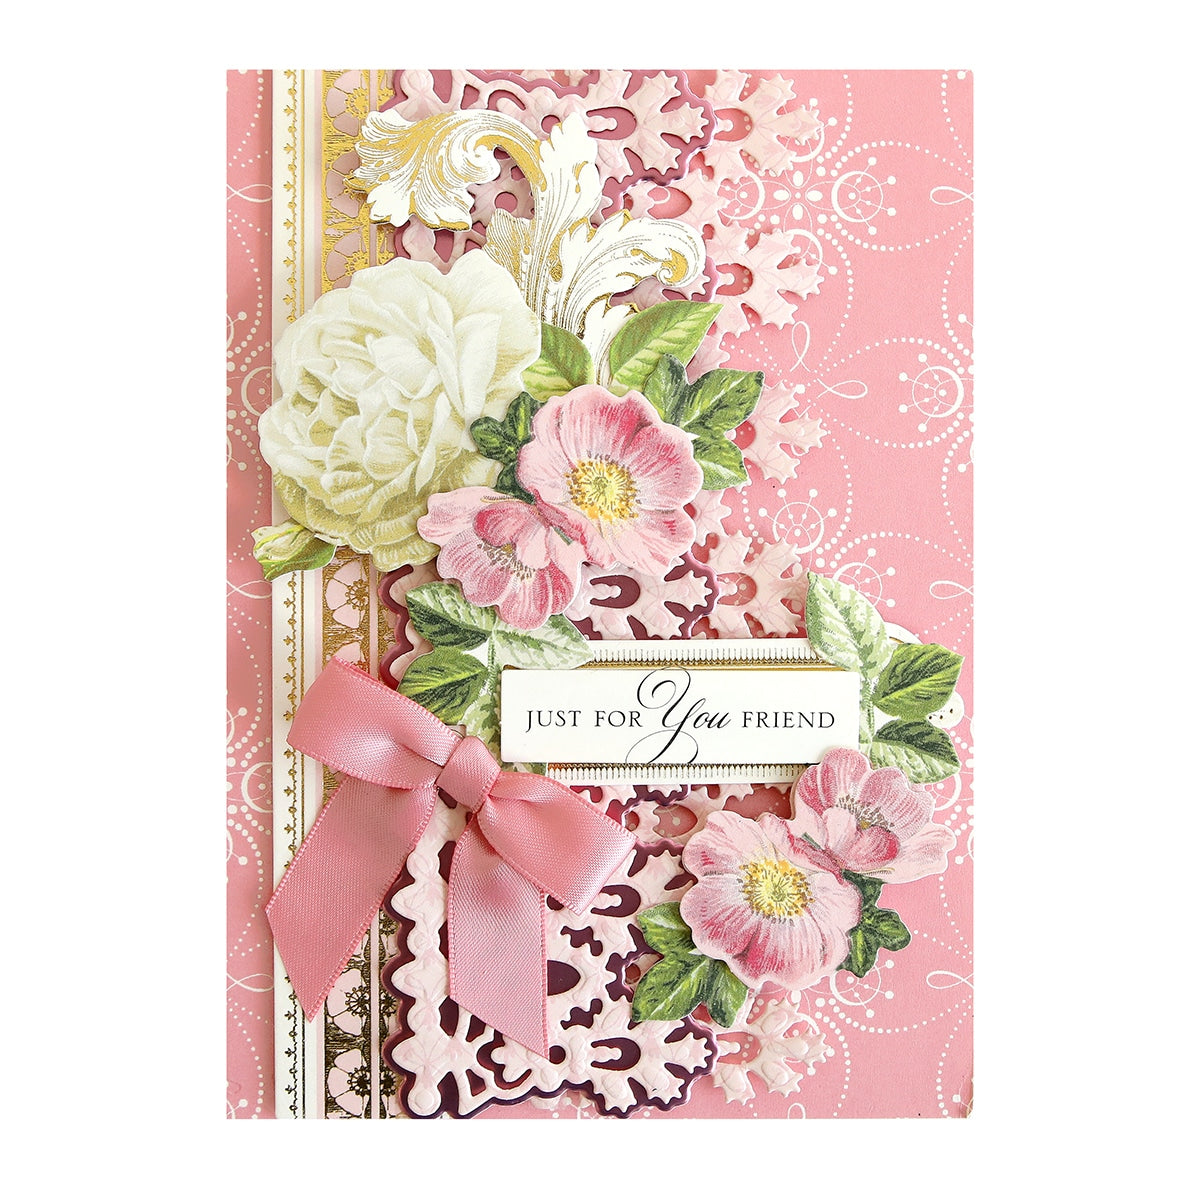 a card with a pink ribbon and flowers on it.